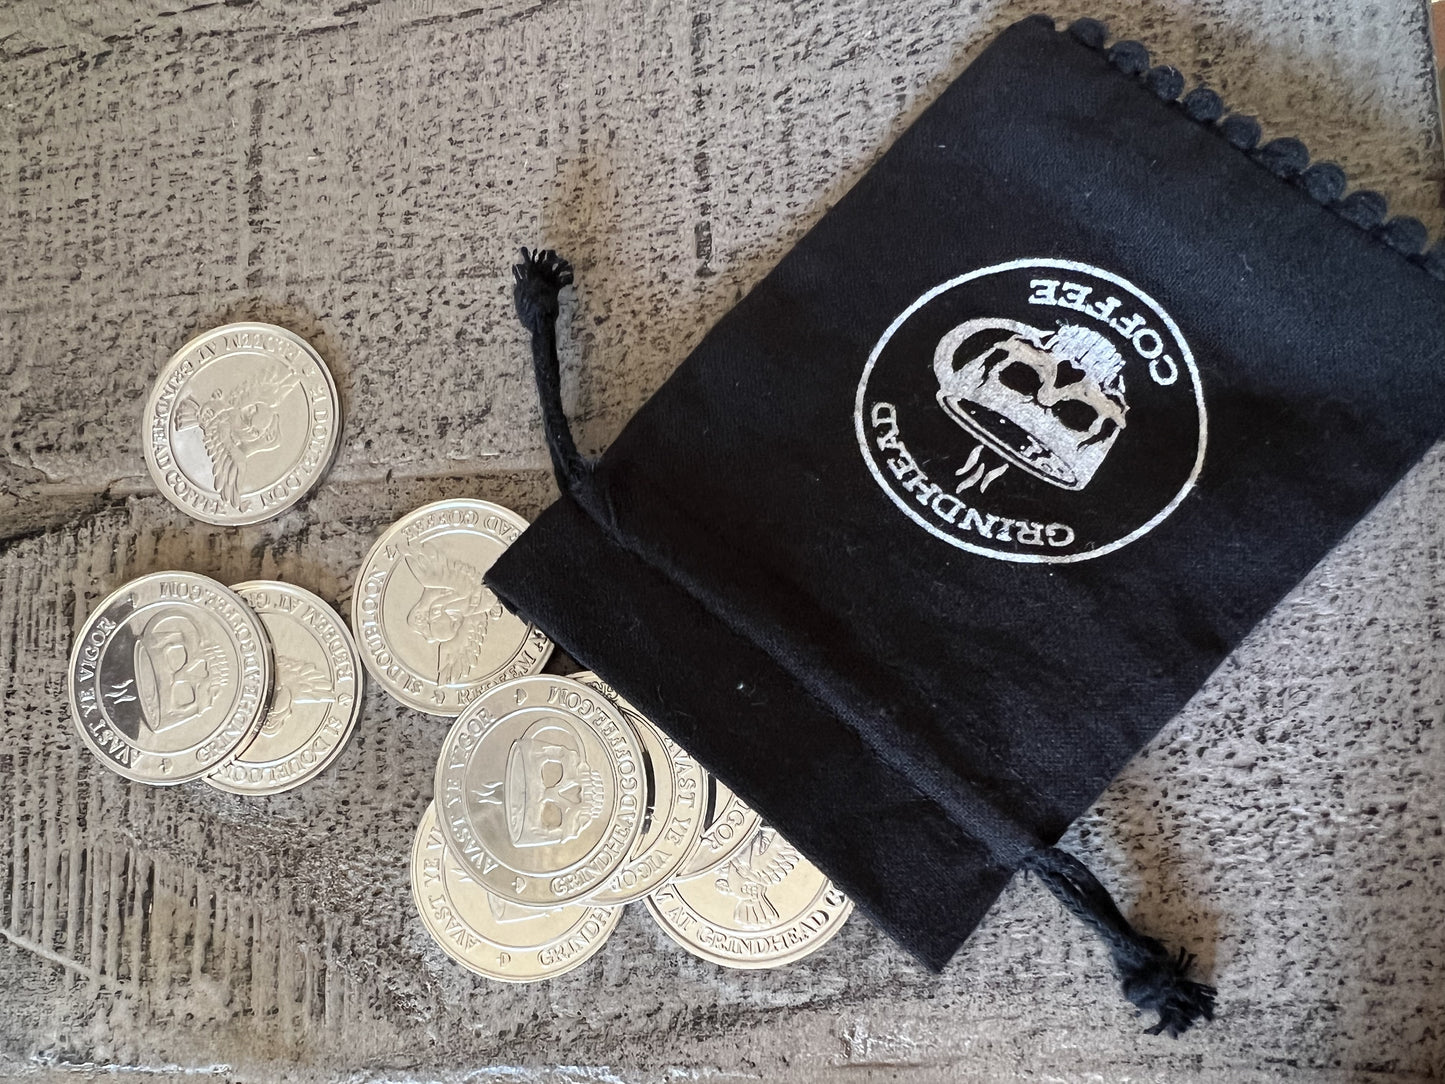 Grindhead Coins - Doubloons - Bulk Options